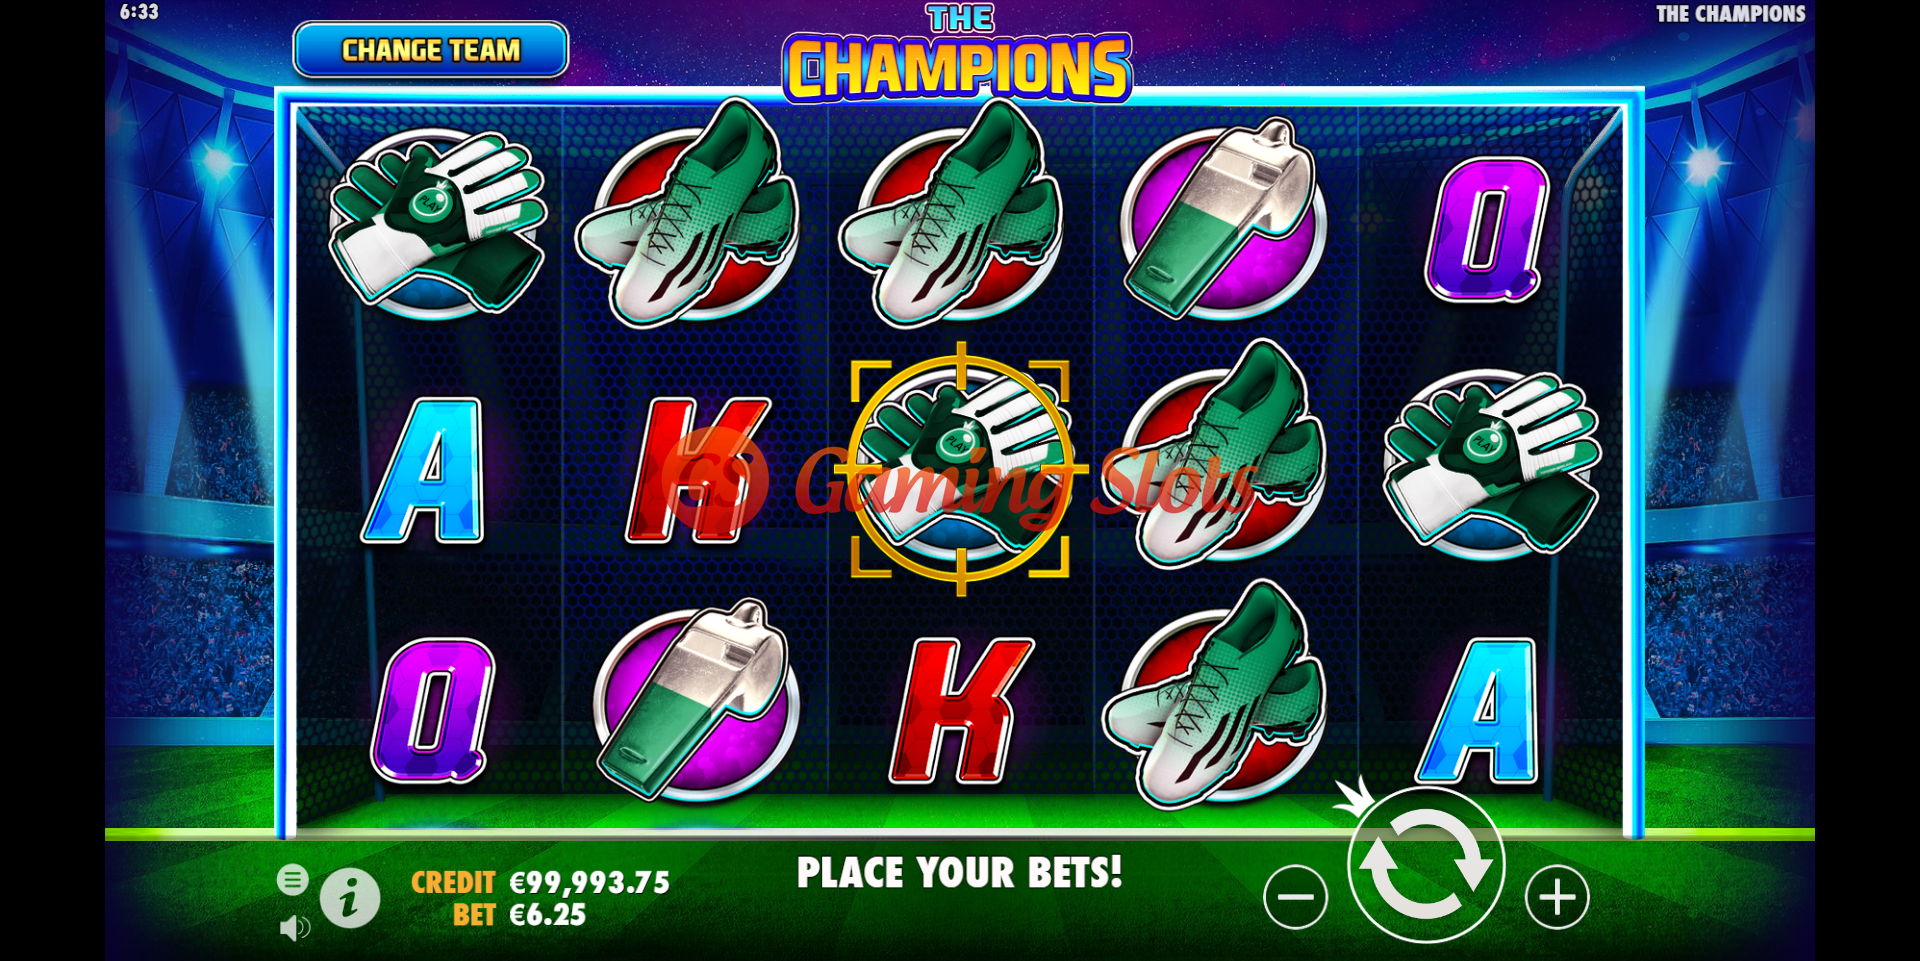 Base Game for The Champions slot from Pragmatic Play